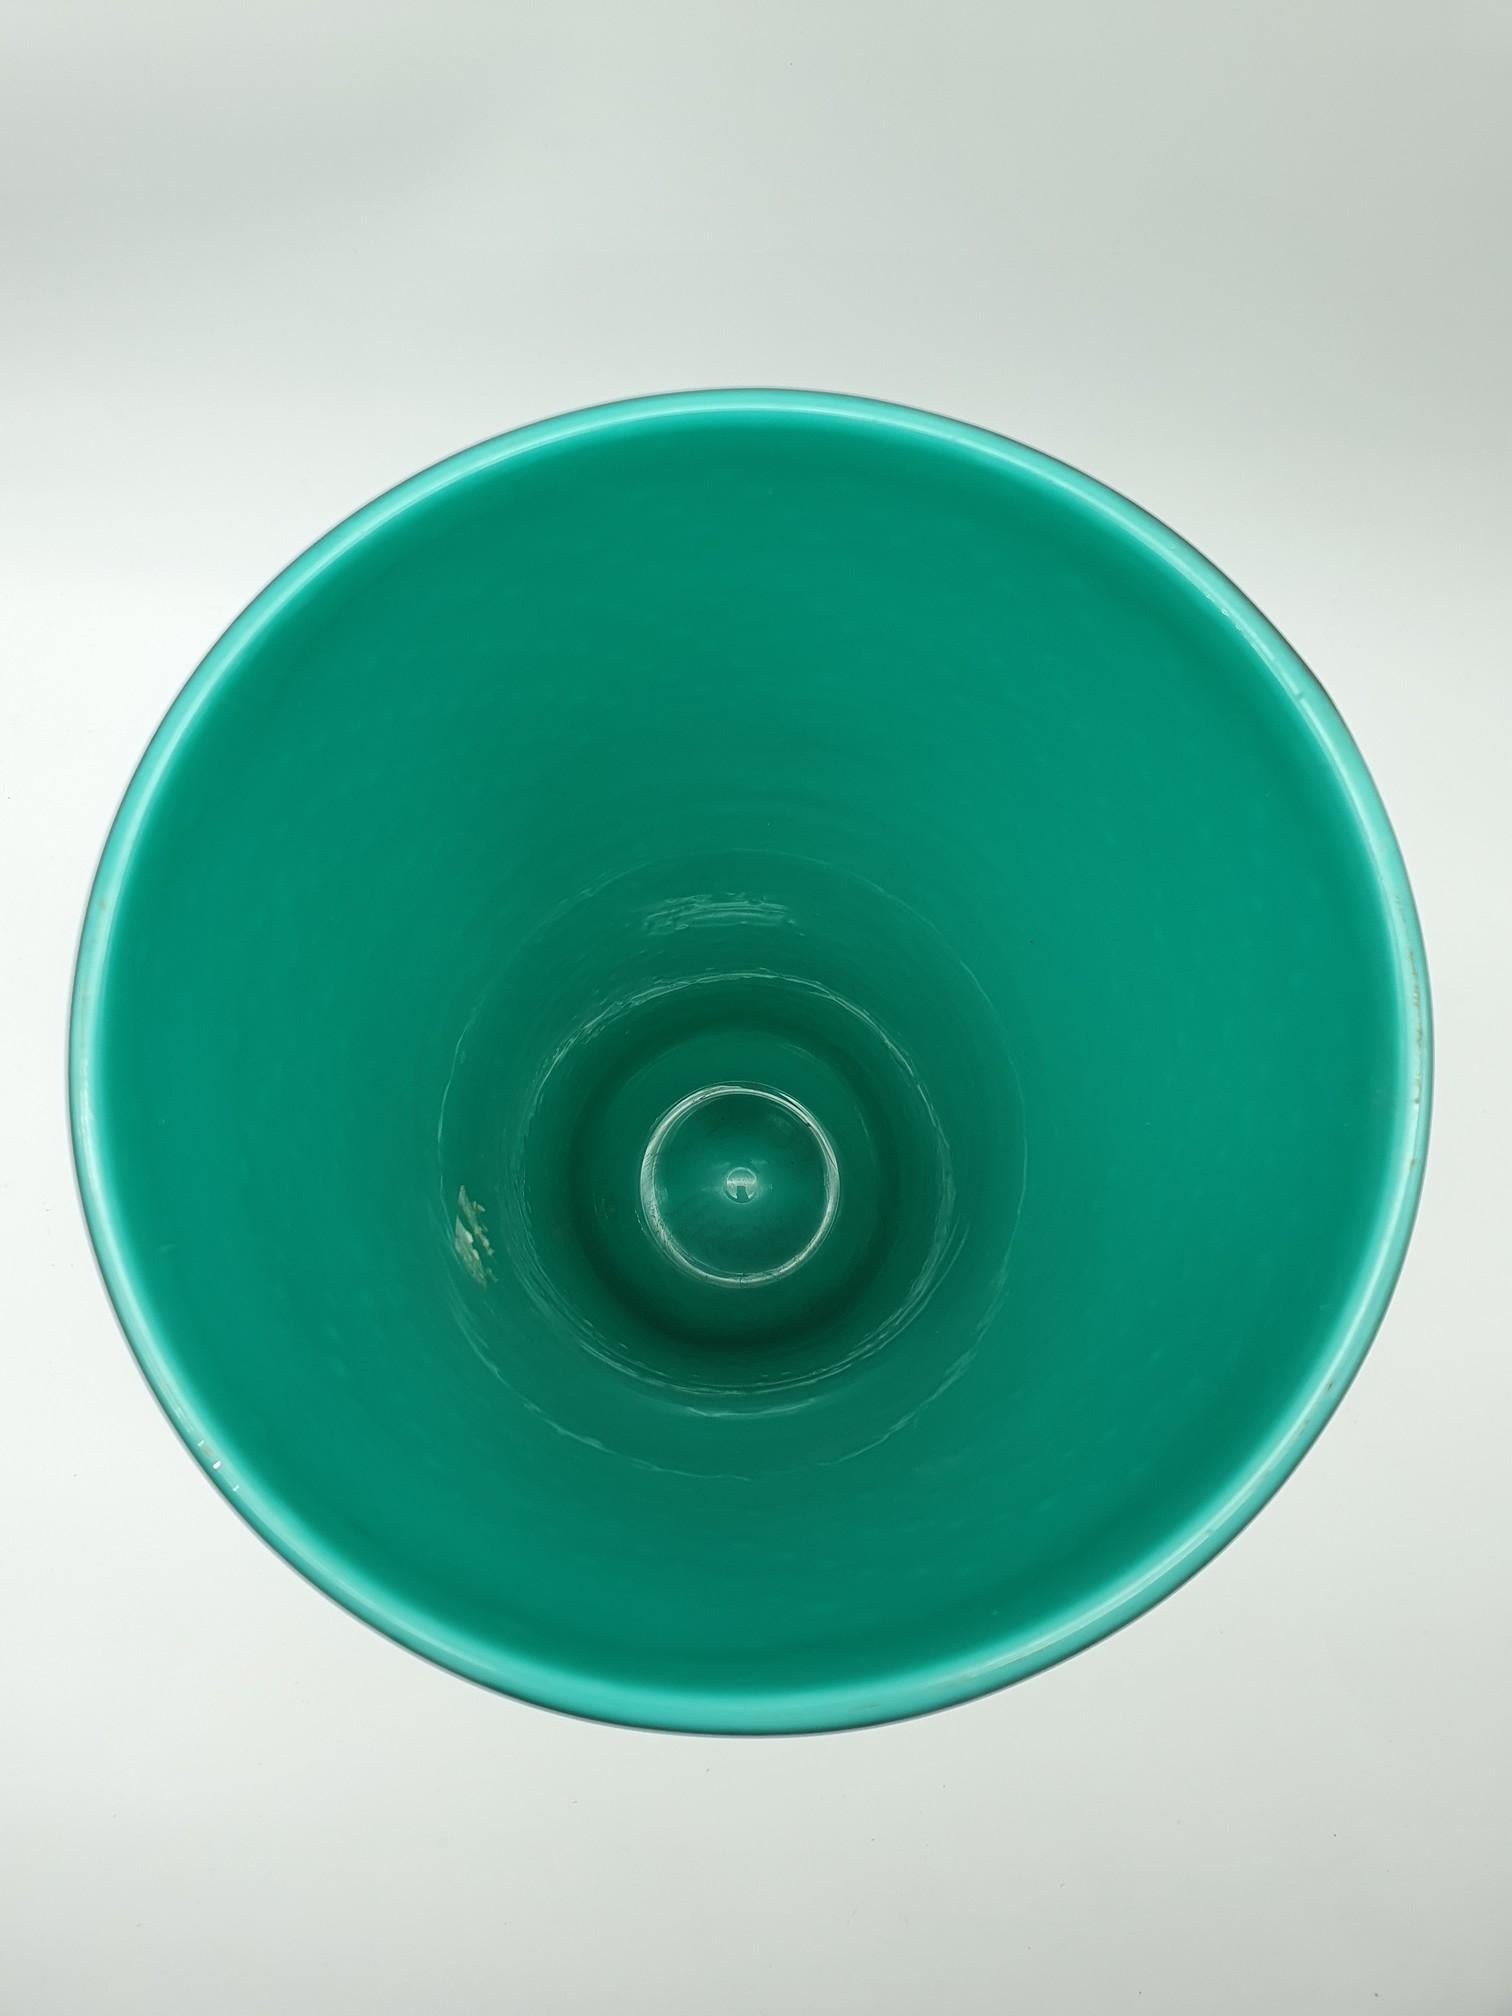 Late 20th Century Modern Murano Glass Vase Centerpiece in Dark Green Color by Cenedese, Early 1990 For Sale